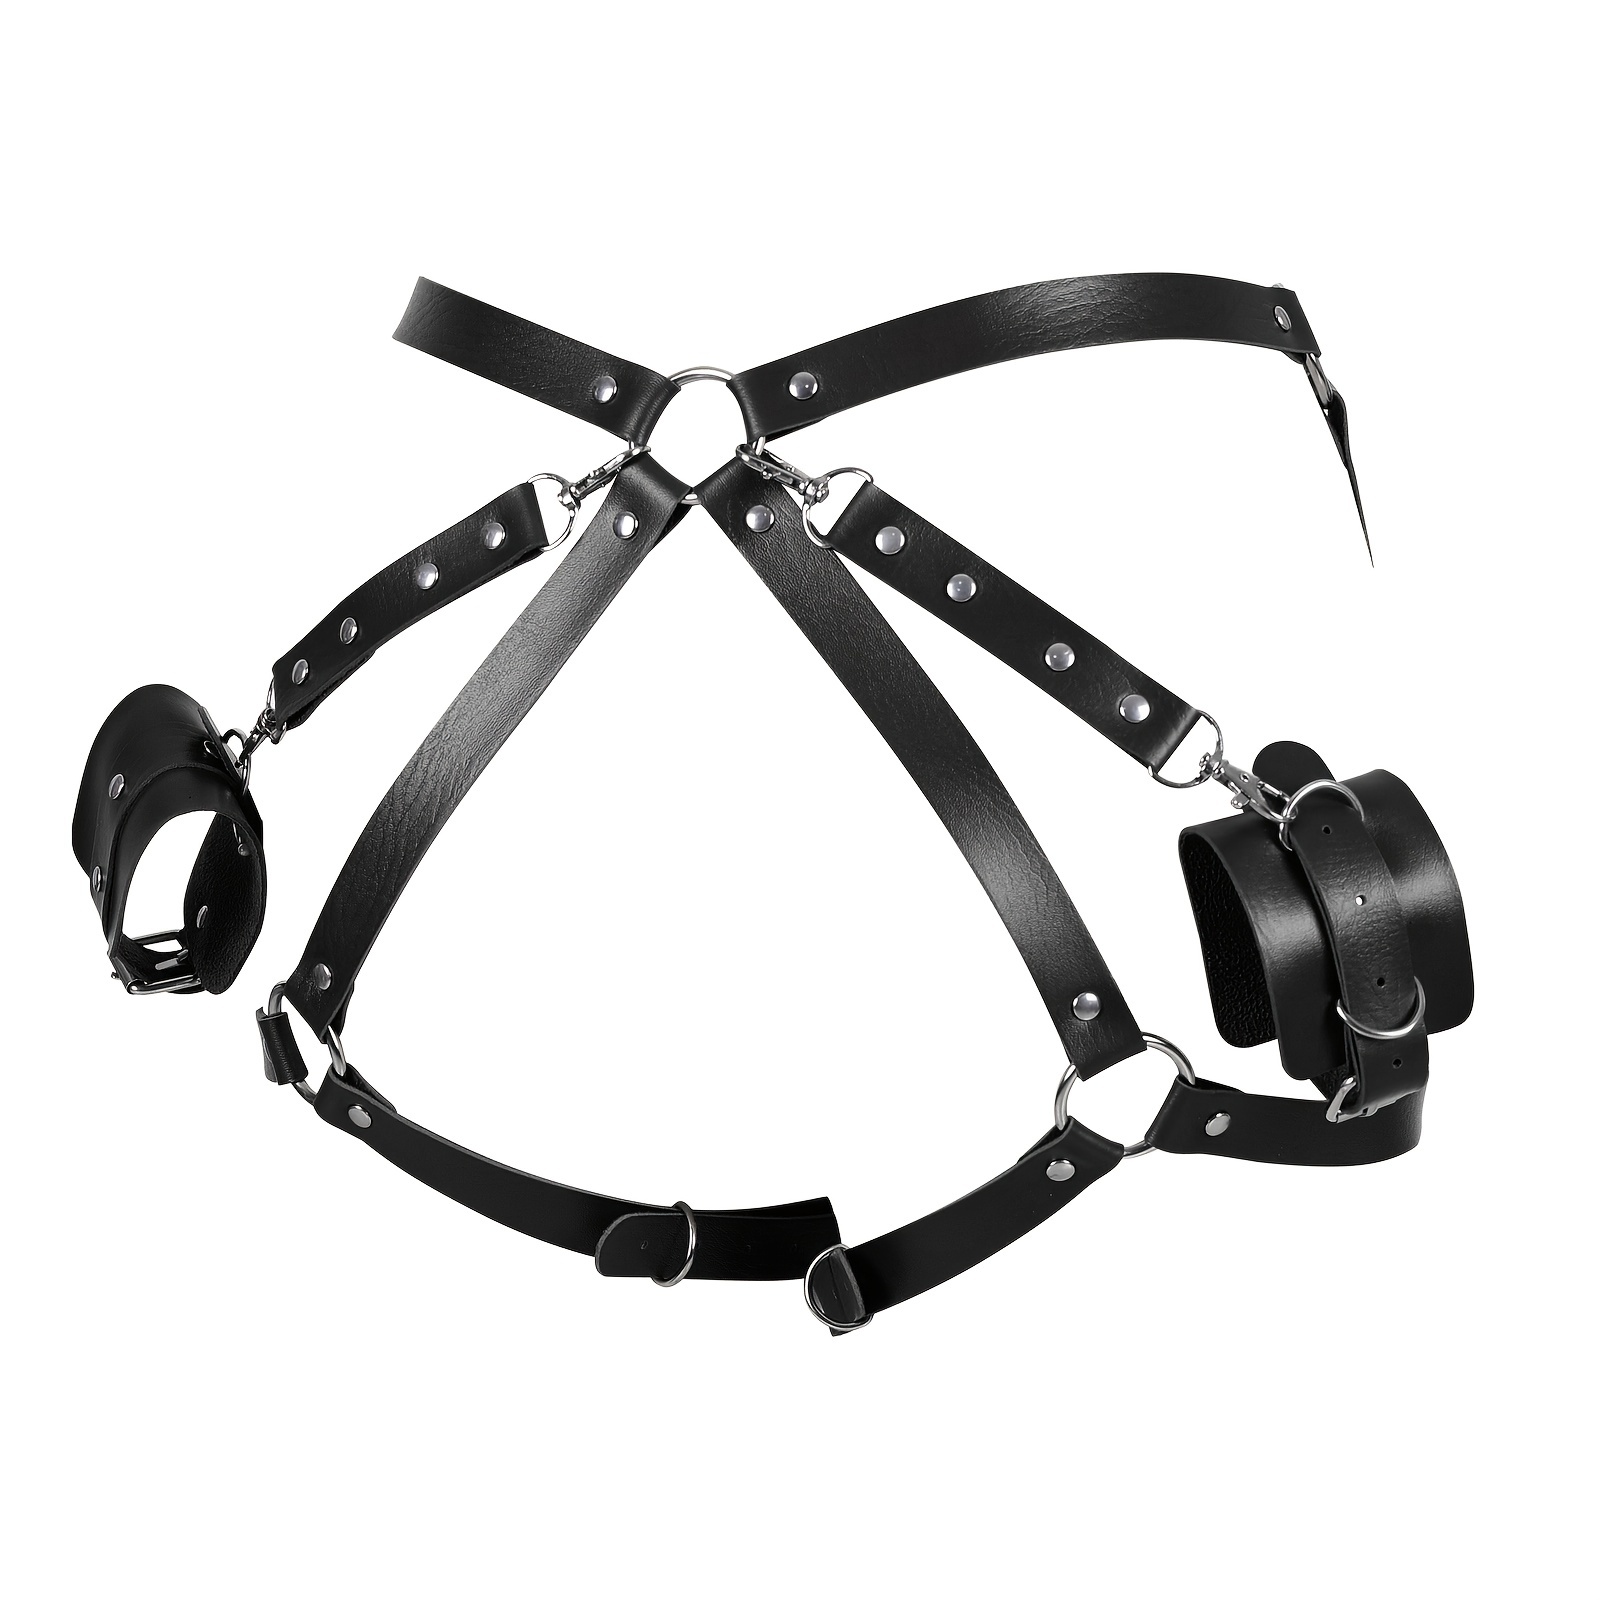 PU Leather Lingerie Body Harness Women Sexy Chest Harness Belt Sex Toy  Suspender For Women Gothic Belt Valentines Gifts